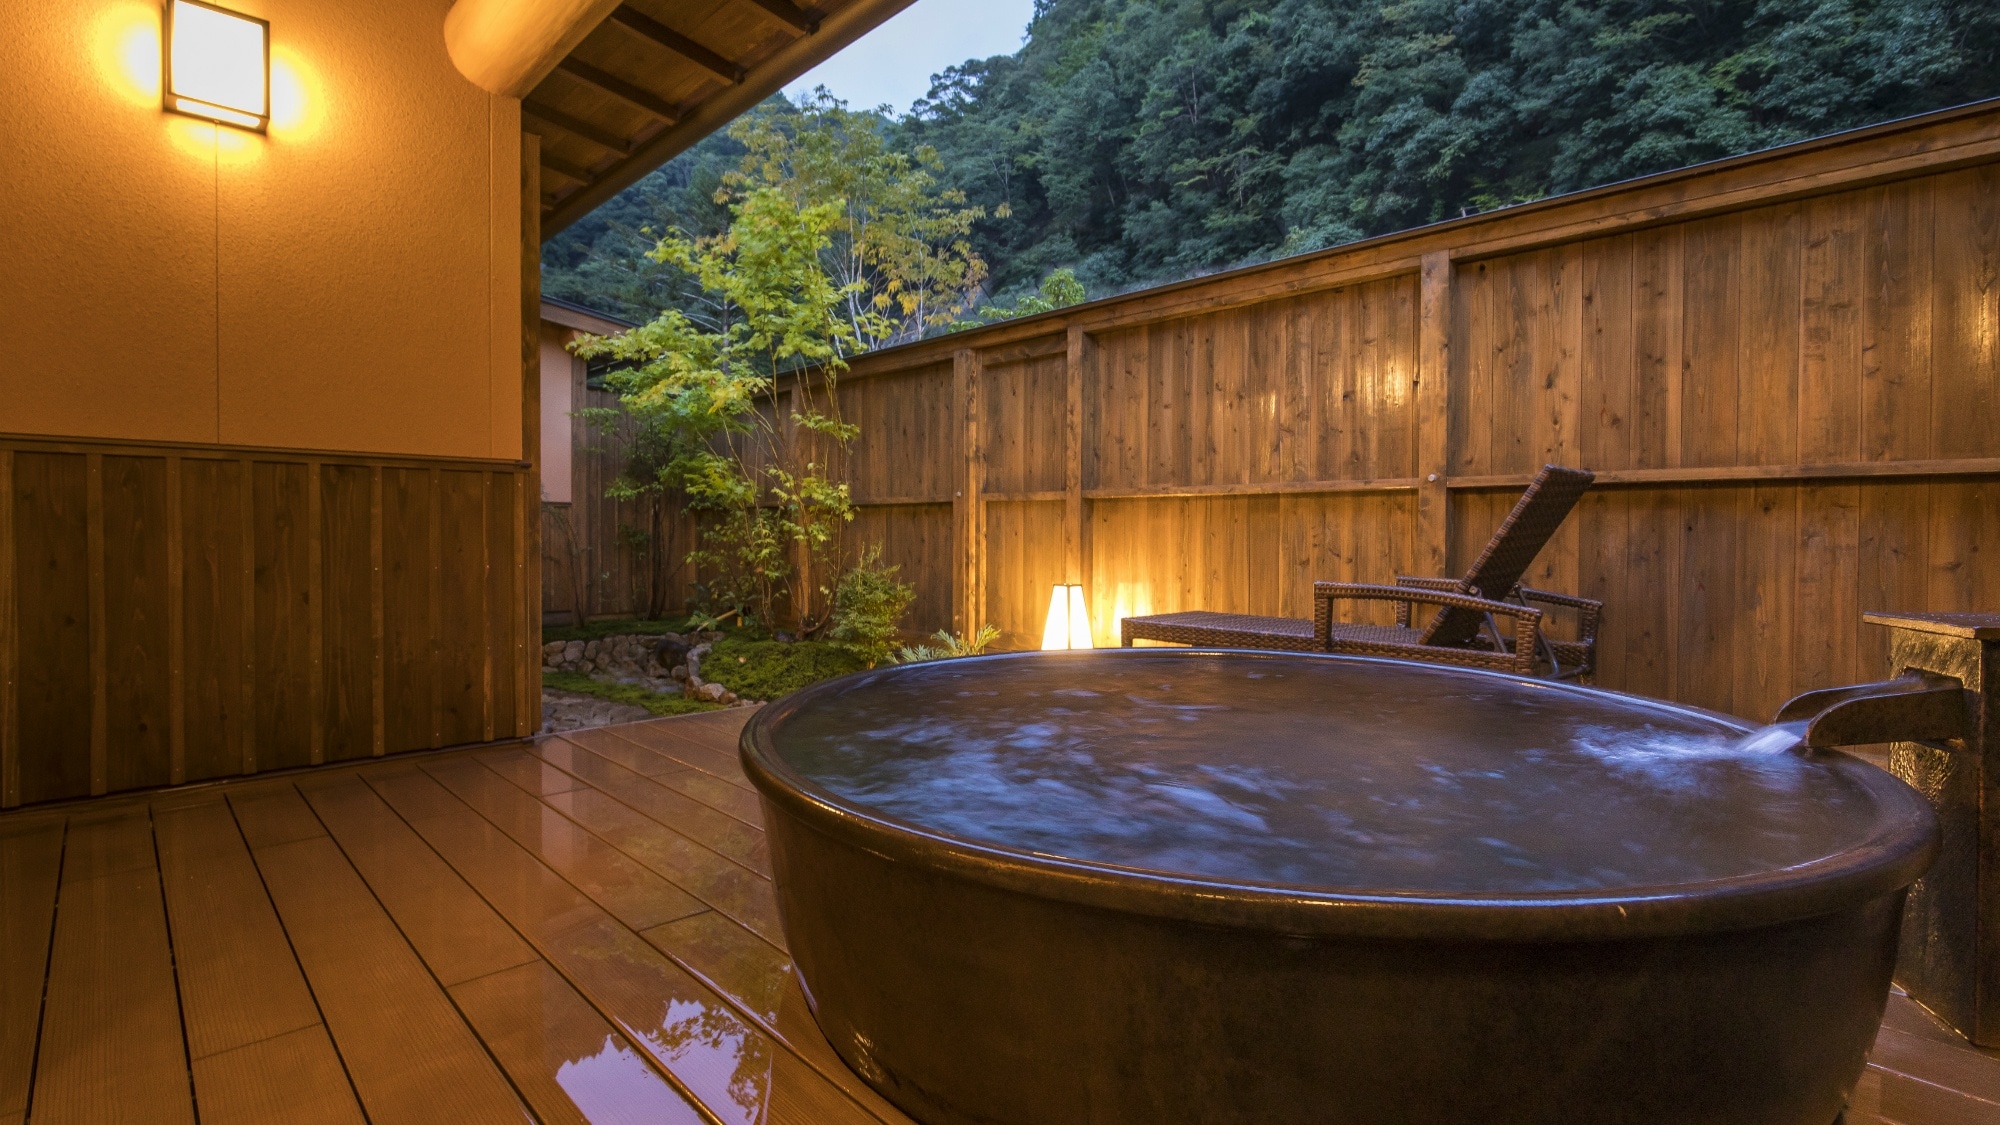 Enjoy a supreme moment in the open-air bath in your room. It is a 100% free-flowing premium hot spring without adding water, heating, or circulating filtration.